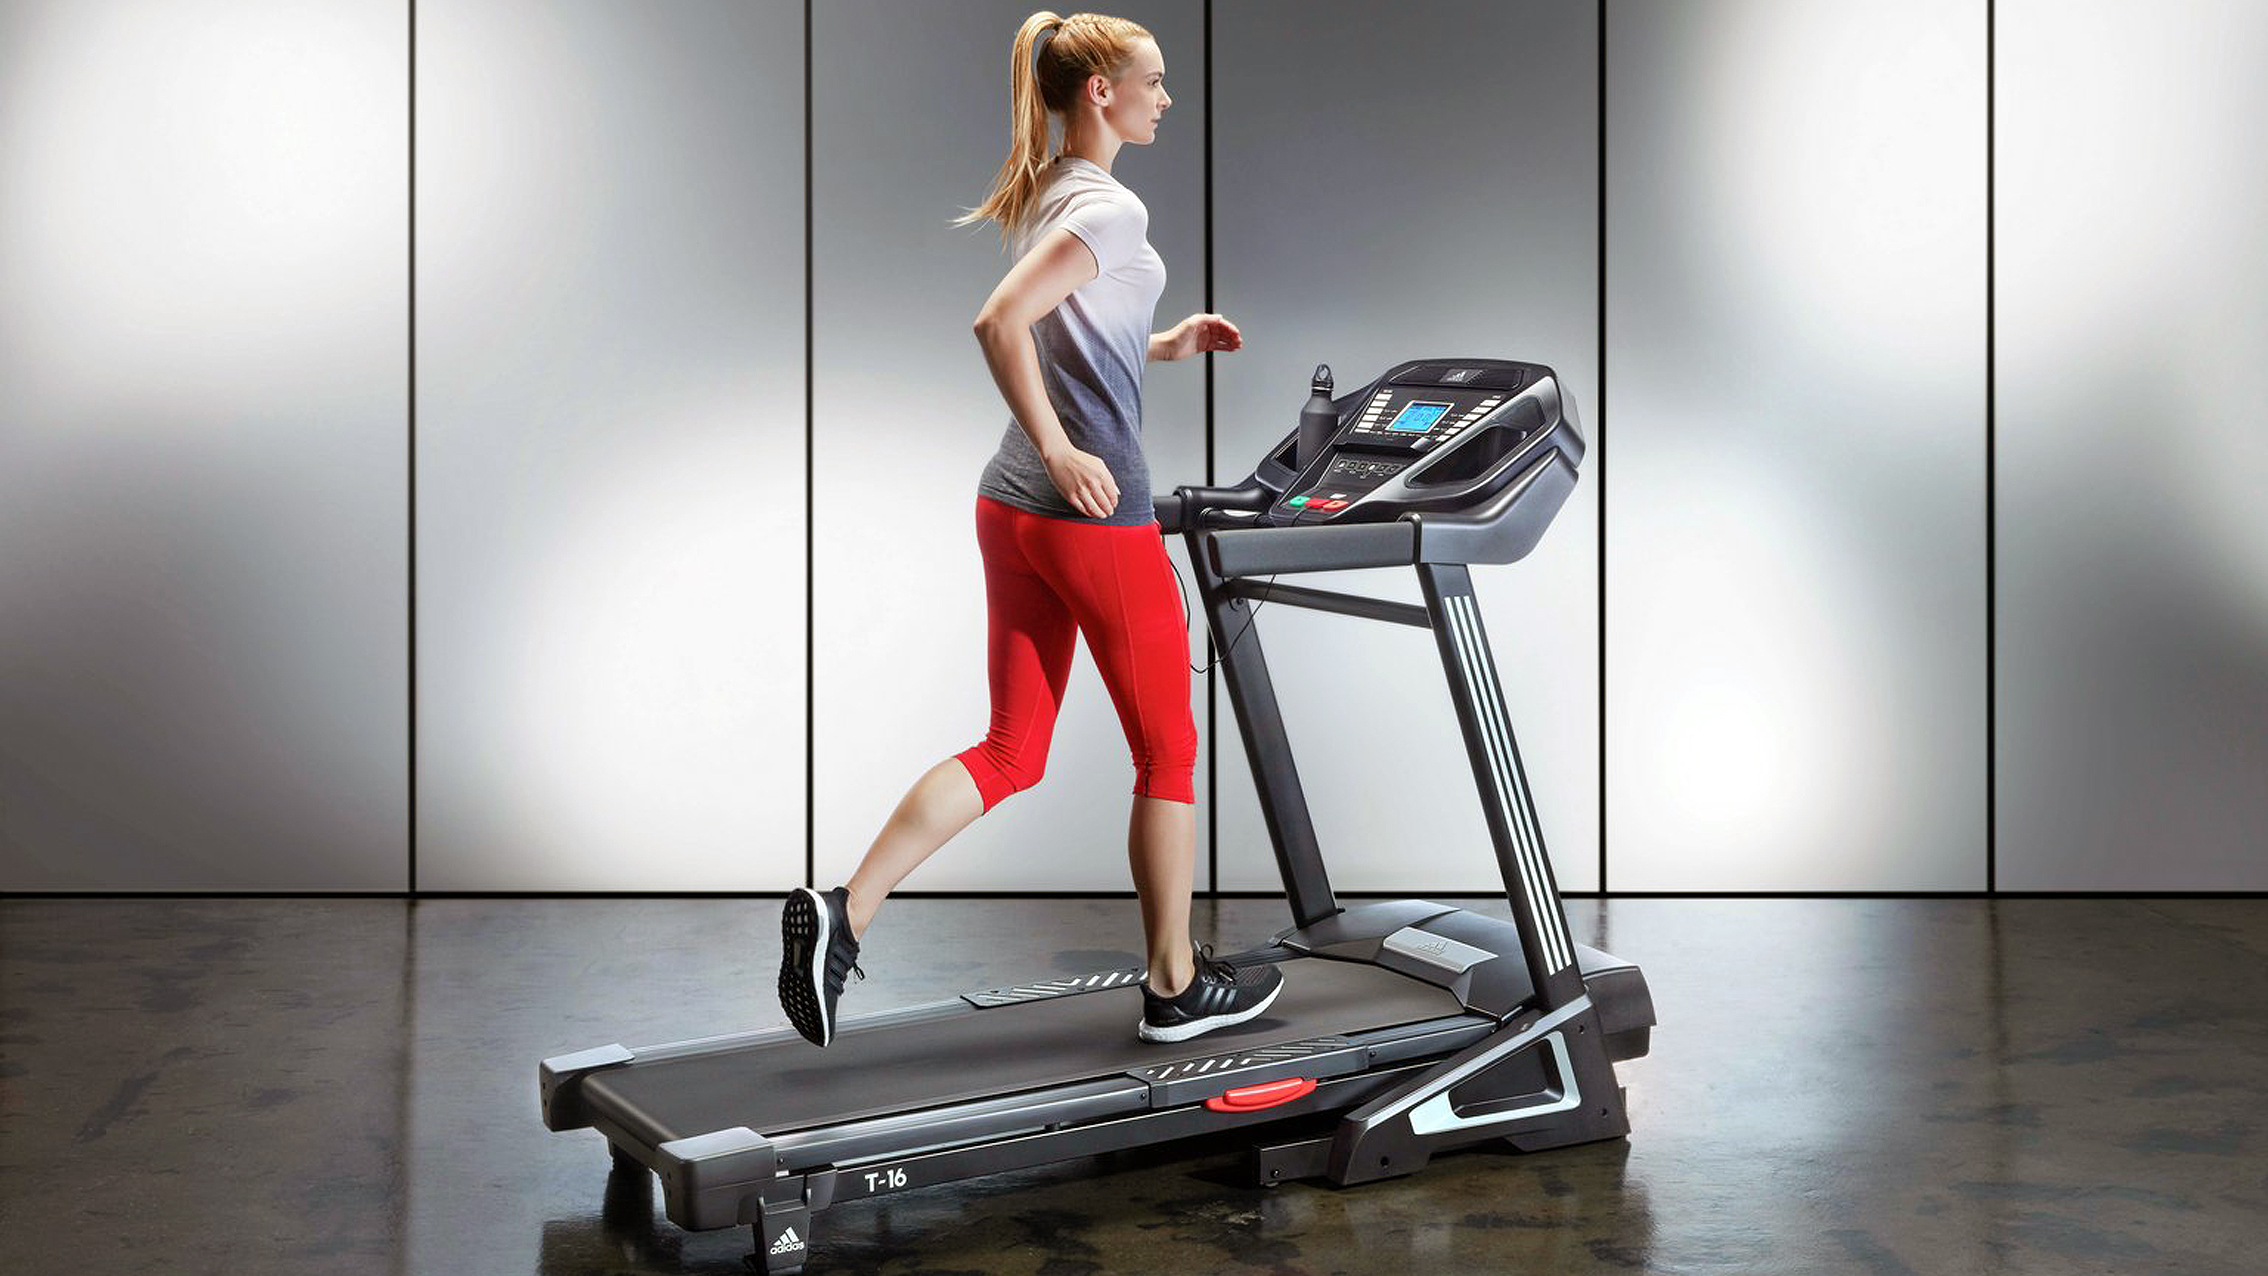 10 best treadmills 2019 running machines to make you more fit, at home